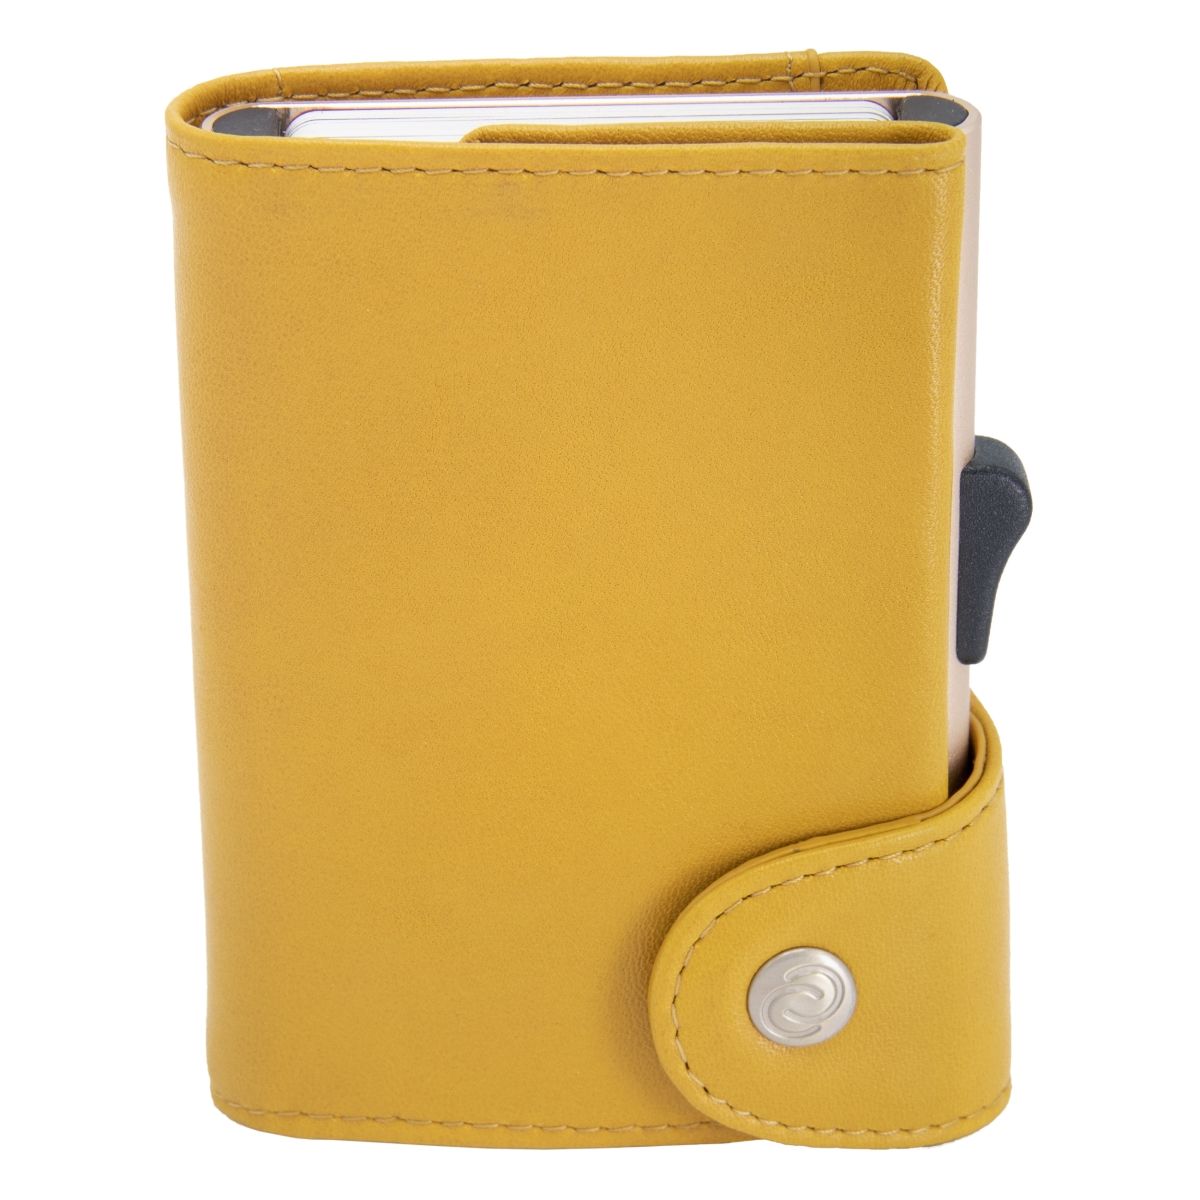 C-Secure XL Aluminum Wallet with Genuine Leather - Solis Yellow